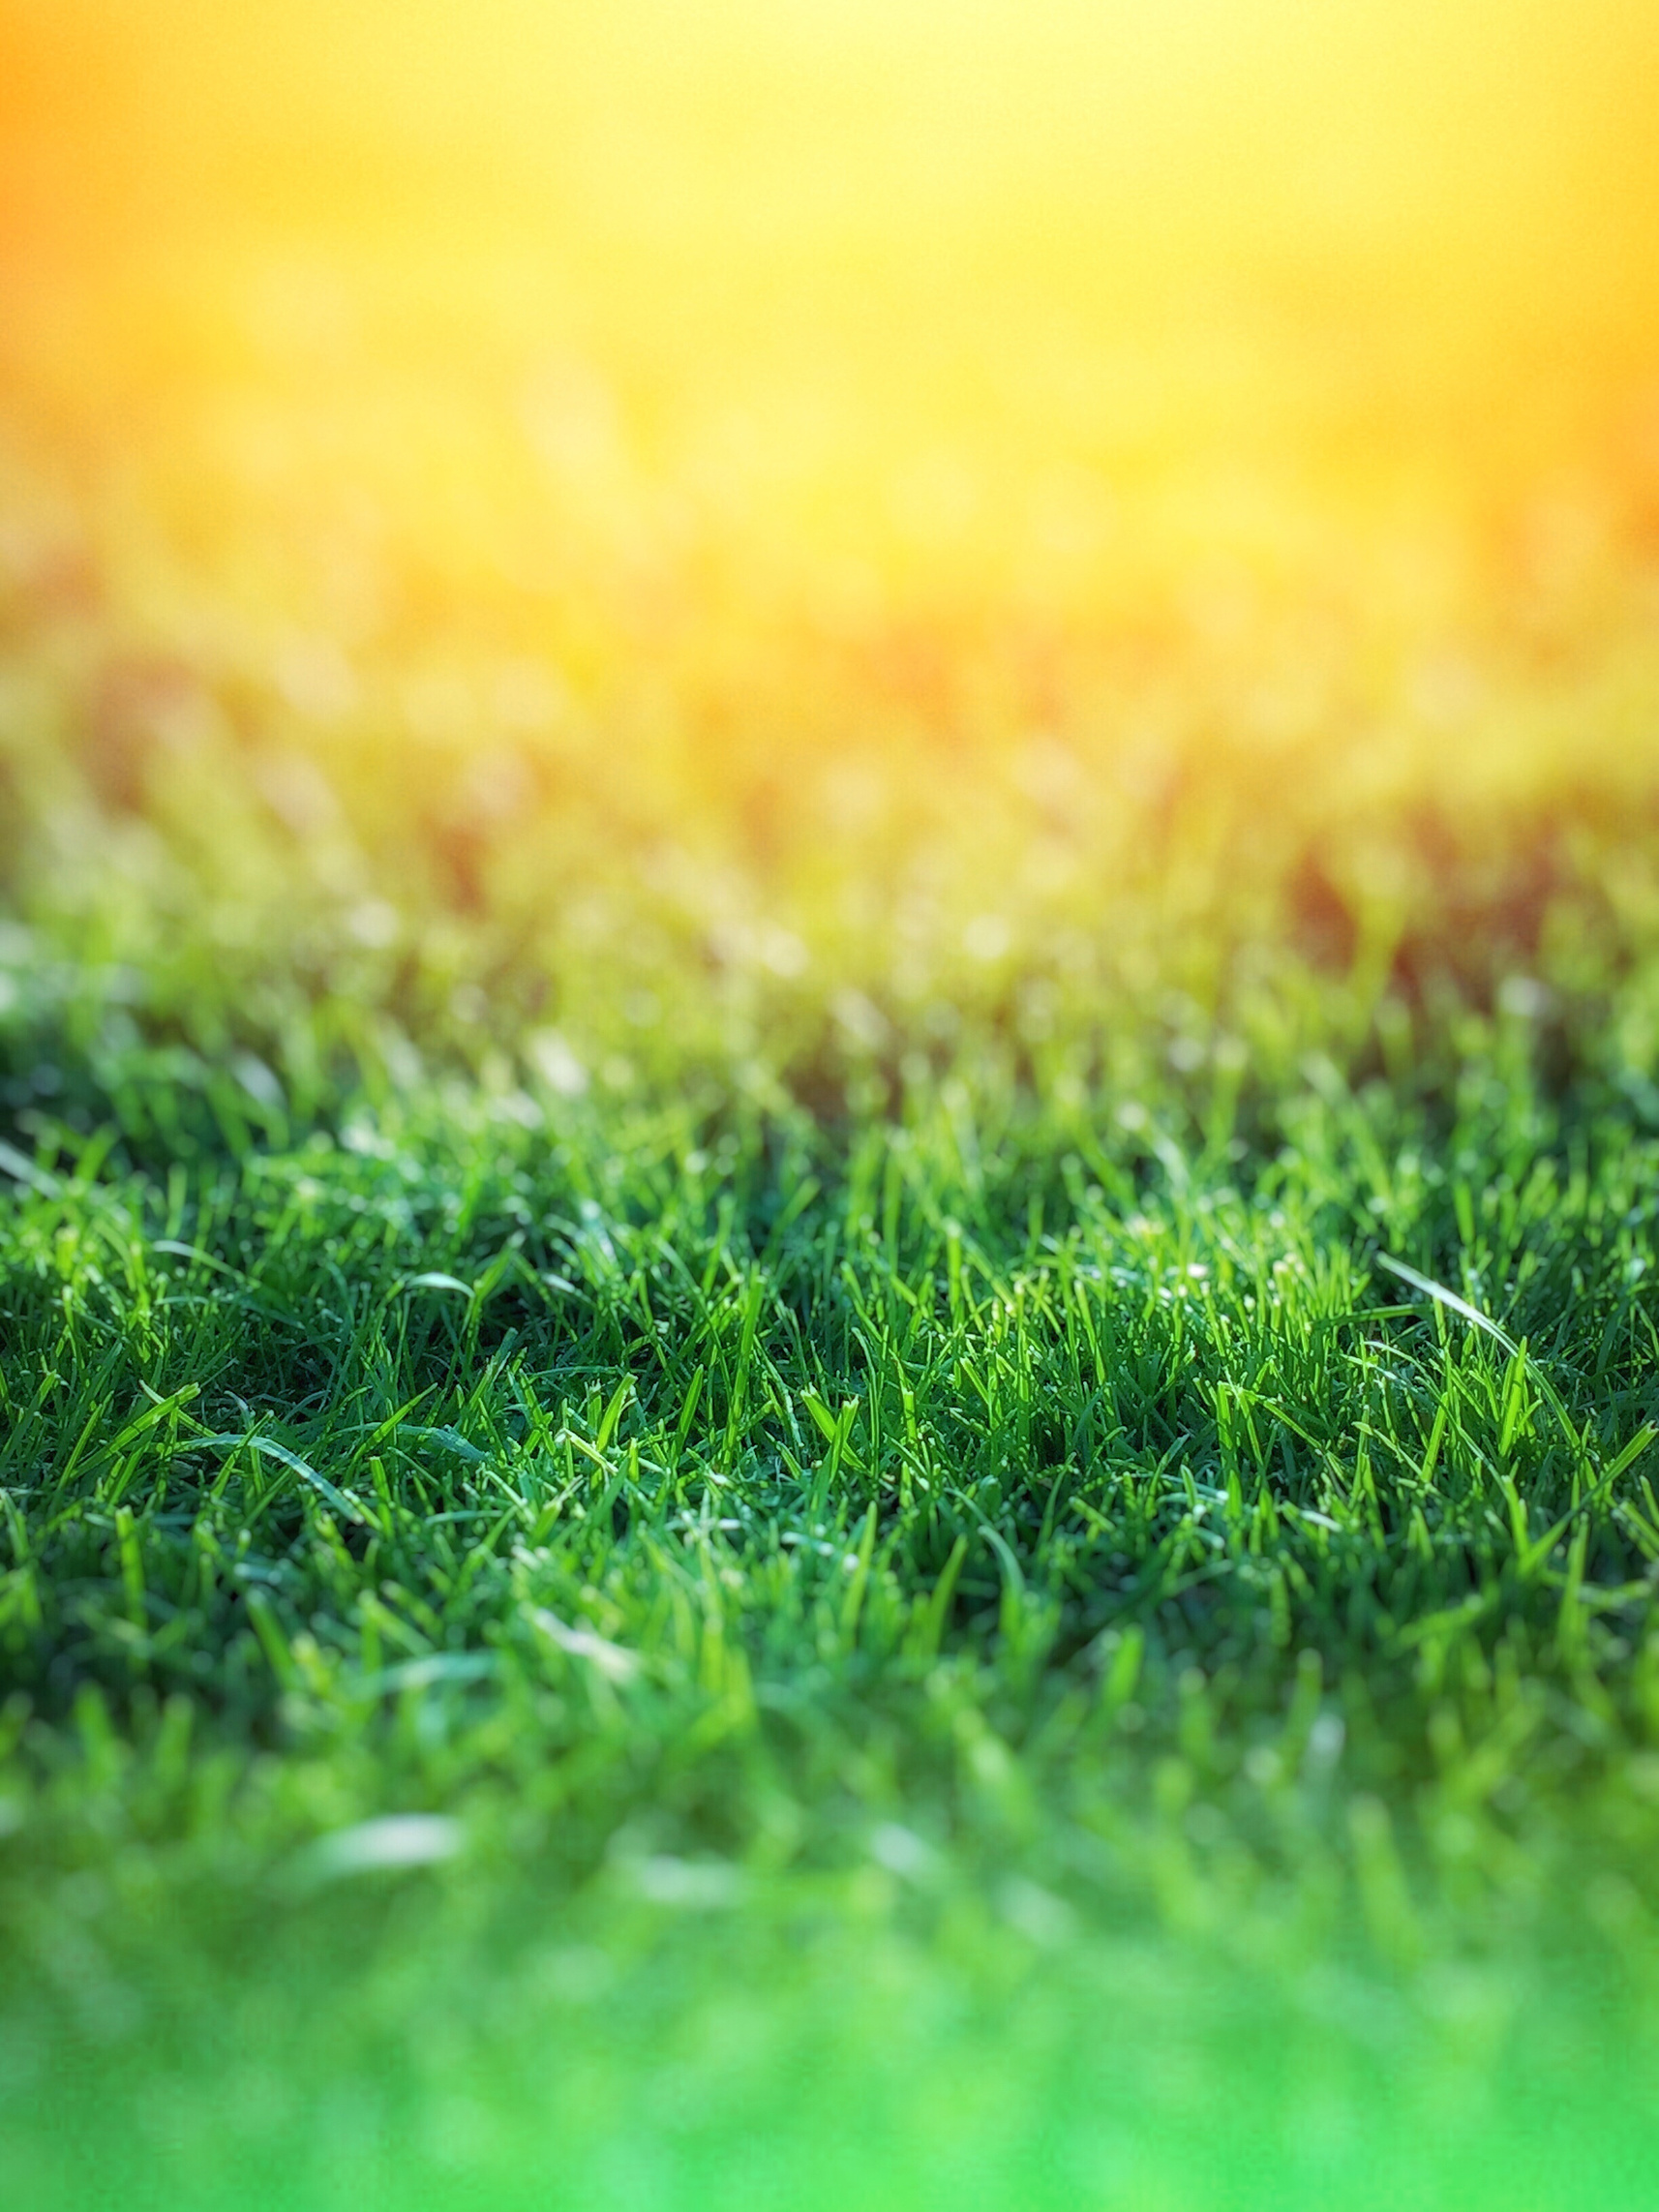 Green Grass over Yellow Background